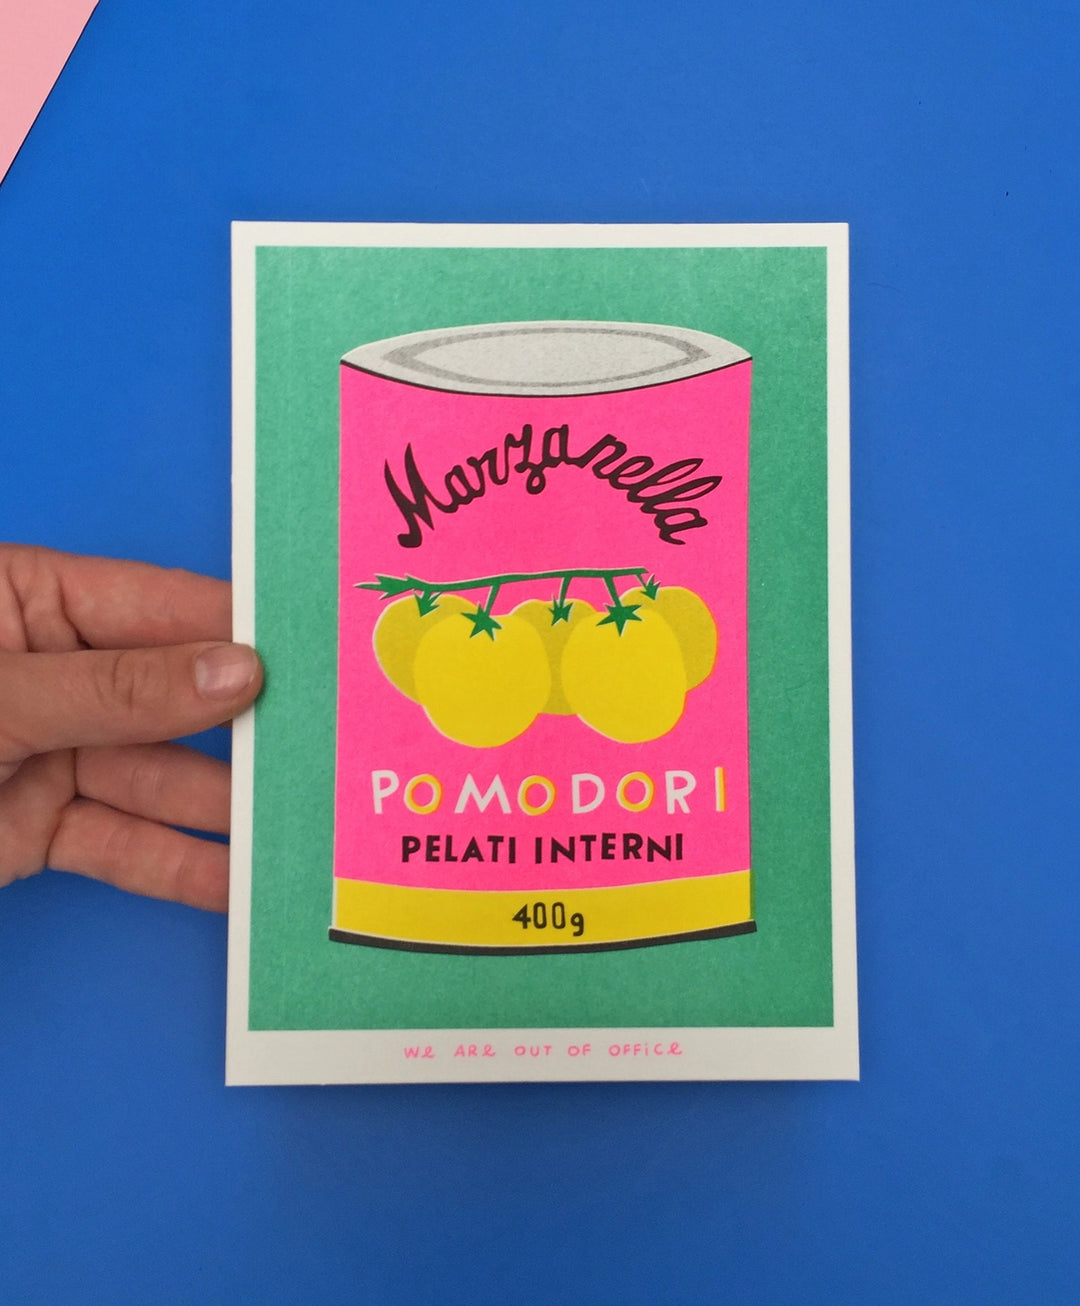 We Are Out Of Office - A can of Pomodori - Print